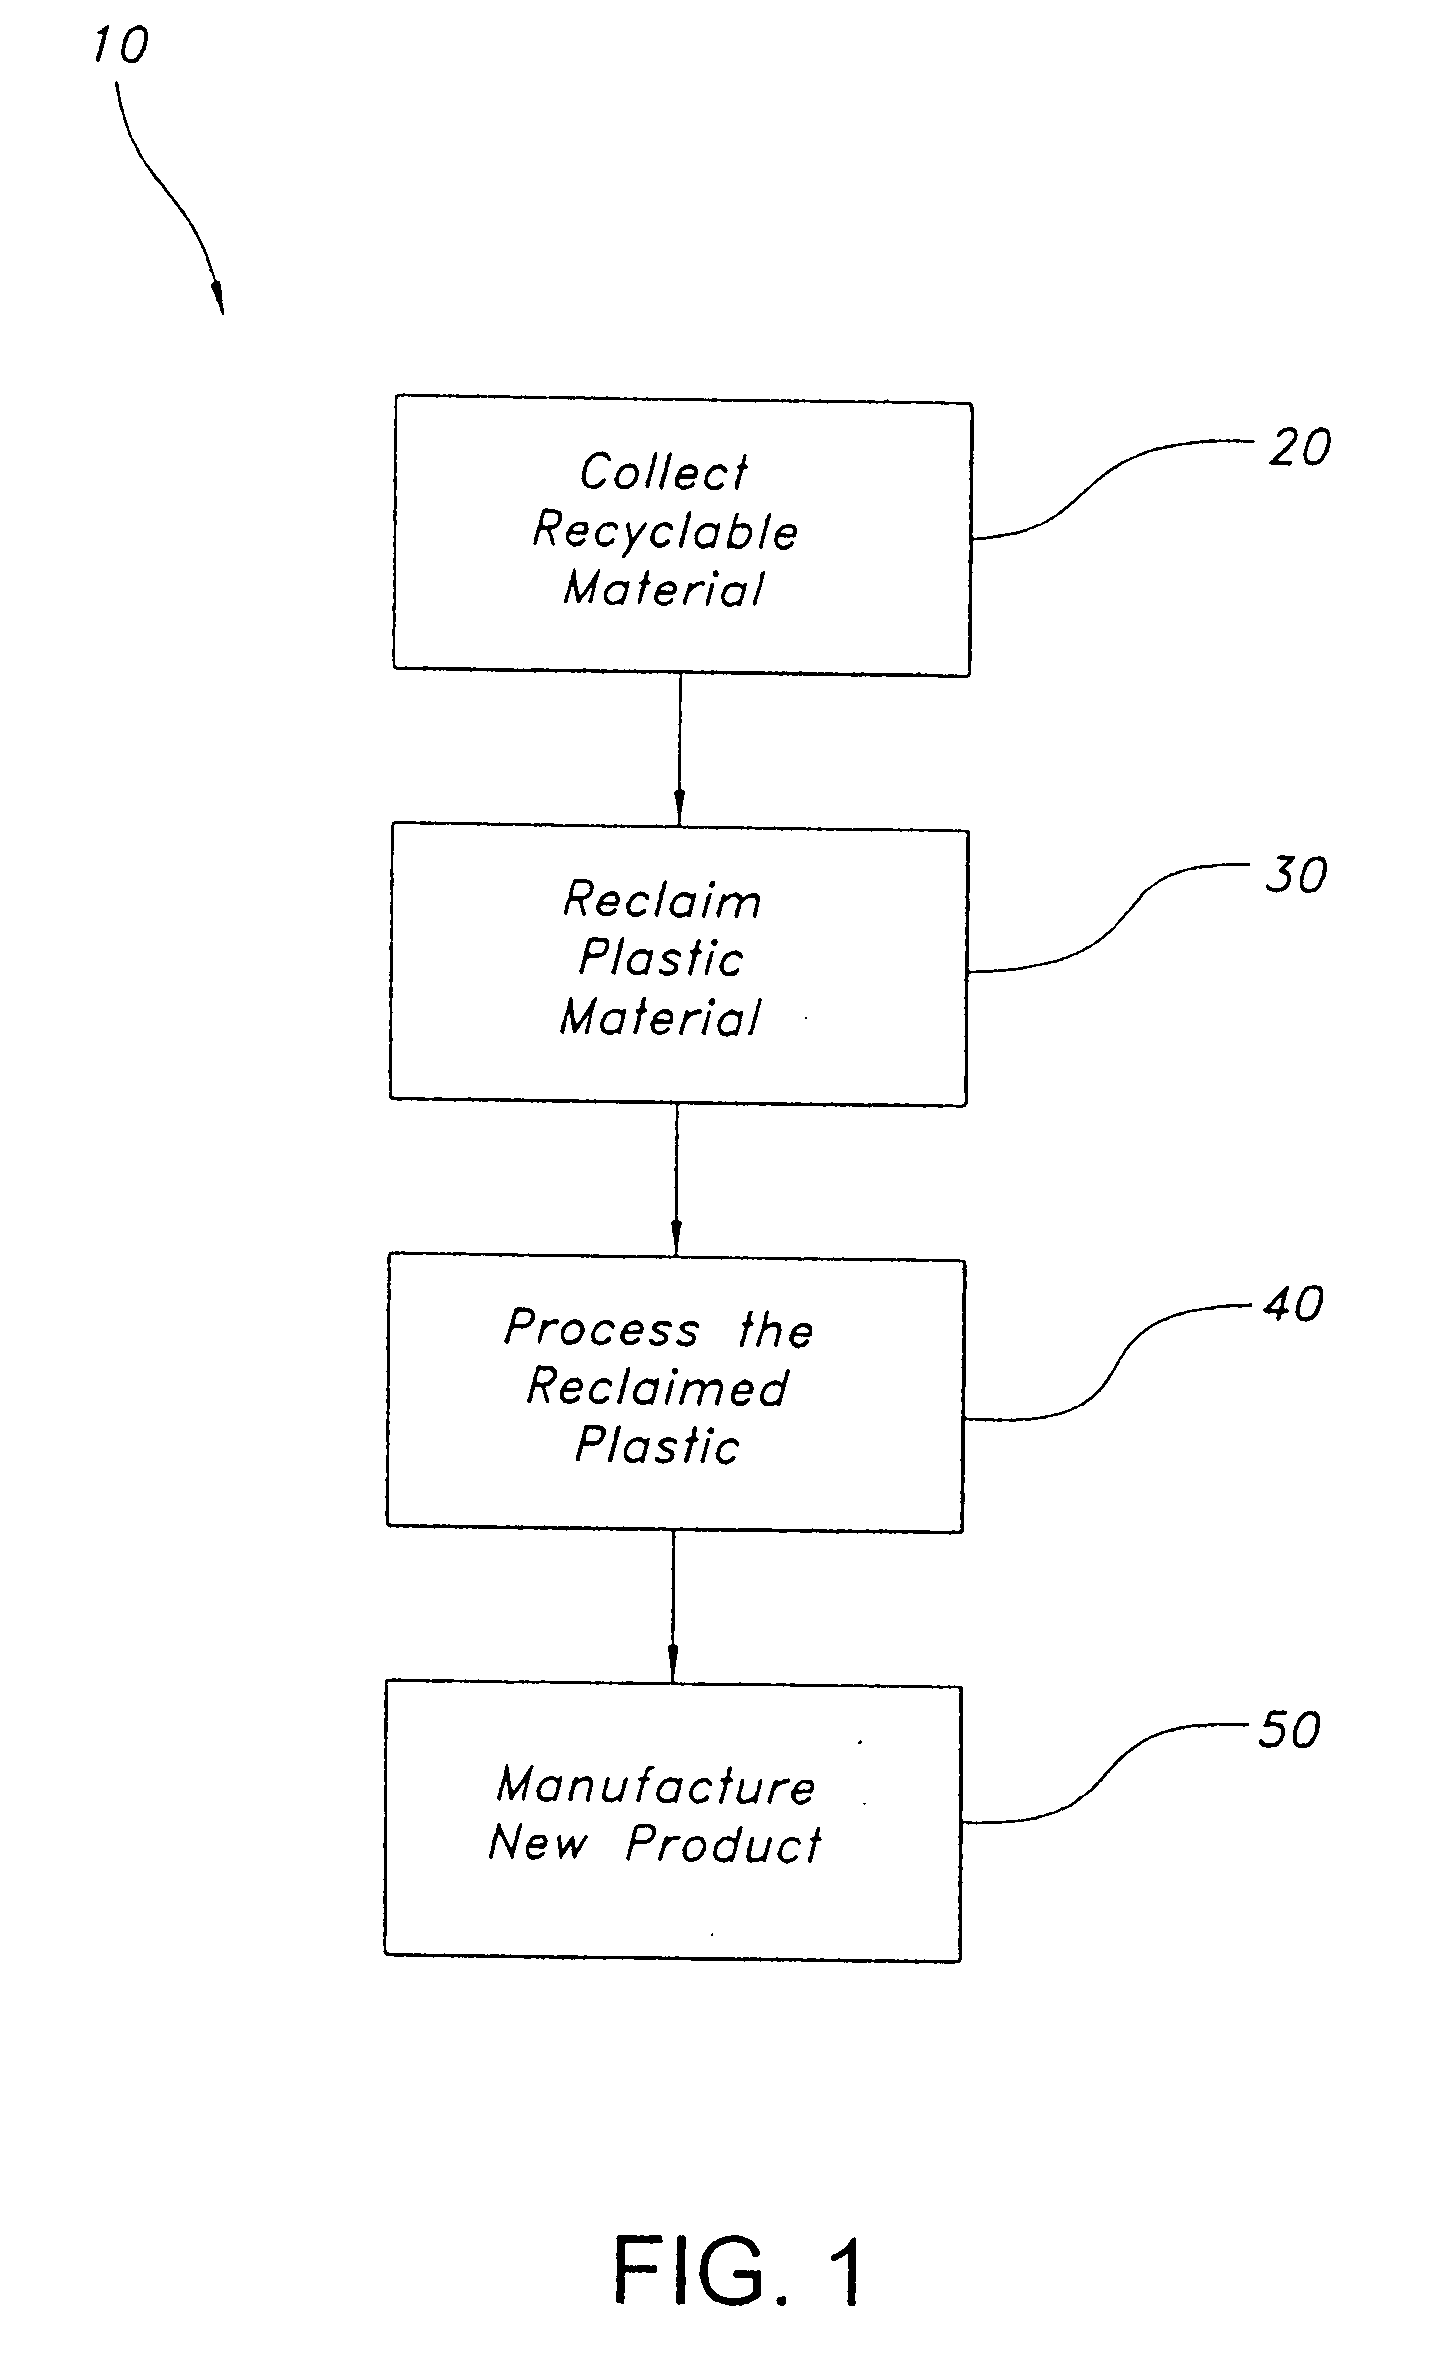 System and process for reclaiming and recycling plastic